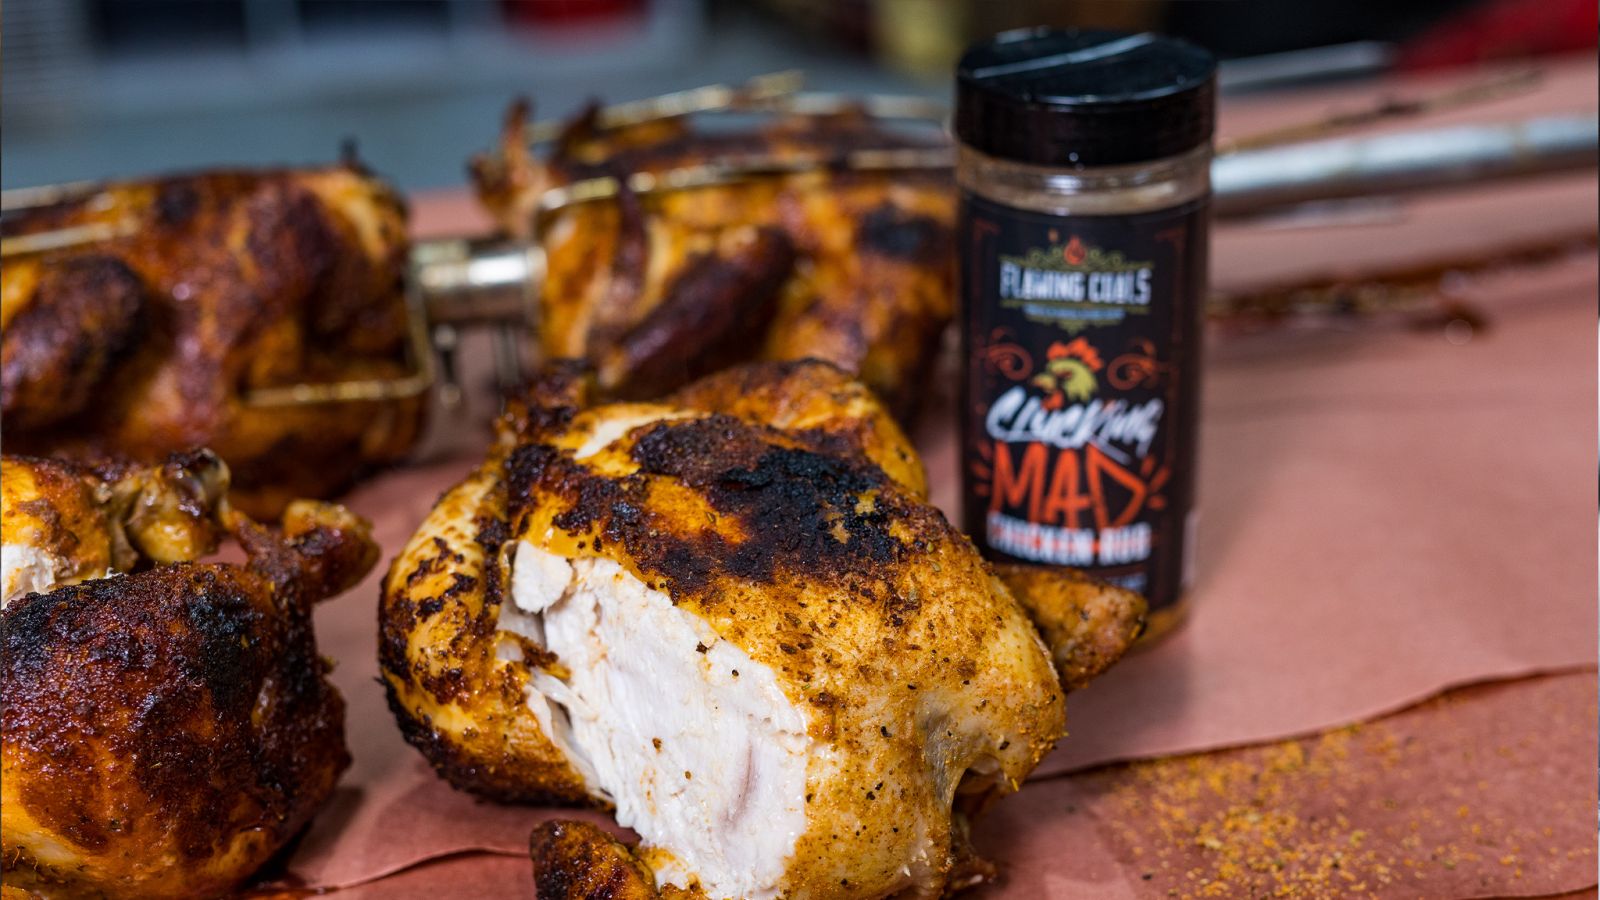 This image shows cooked chickens and Flaming Coals Chicken rub on the side